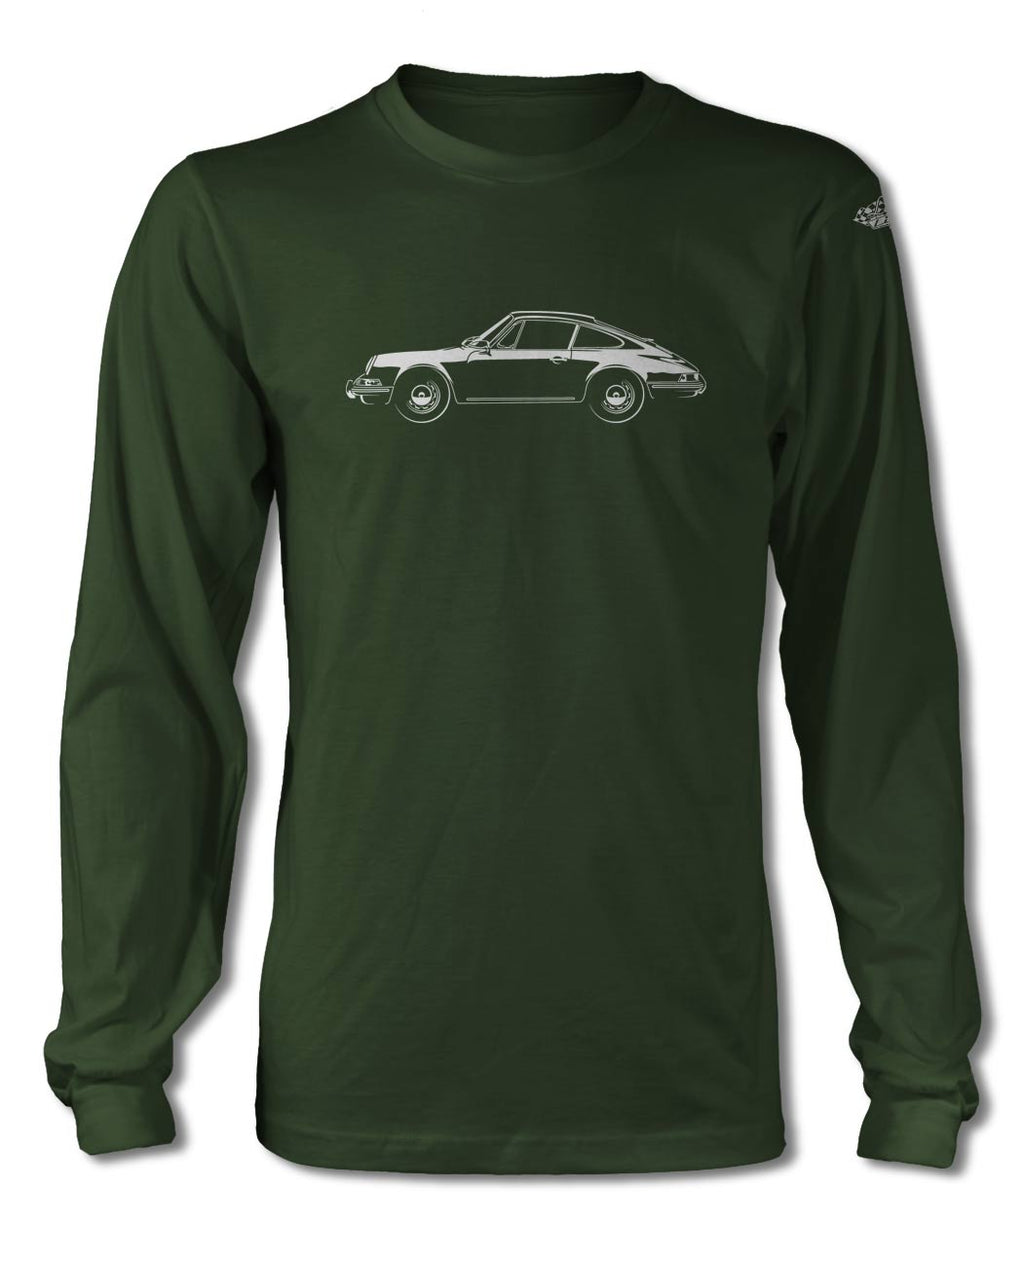 Porsche 912 Coupe T-Shirt - Long Sleeves - Side View